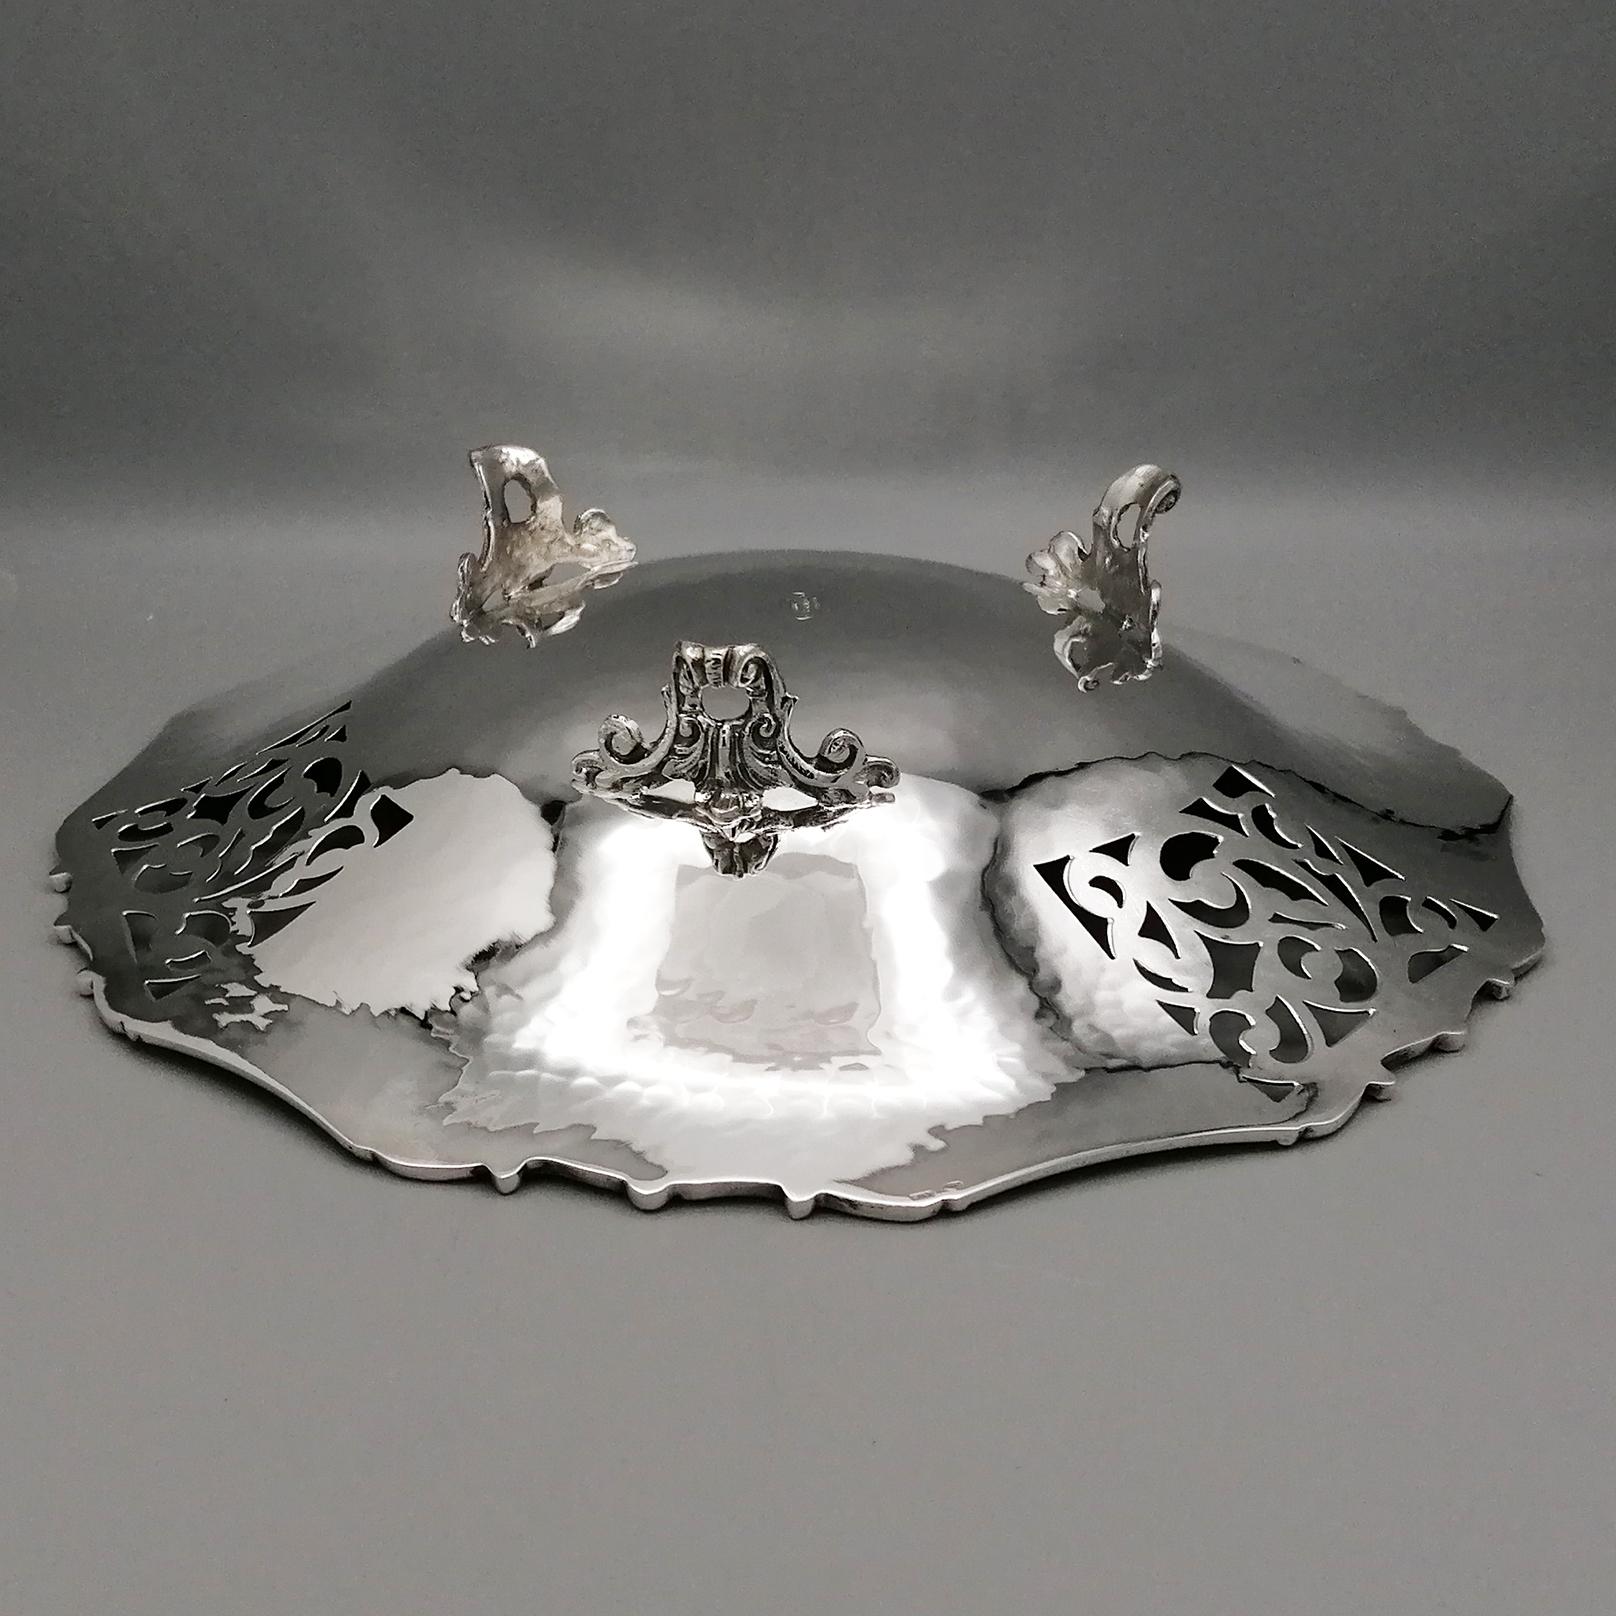 Italian Solid Silver Centerpiece Baroque revival style on feet For Sale 4